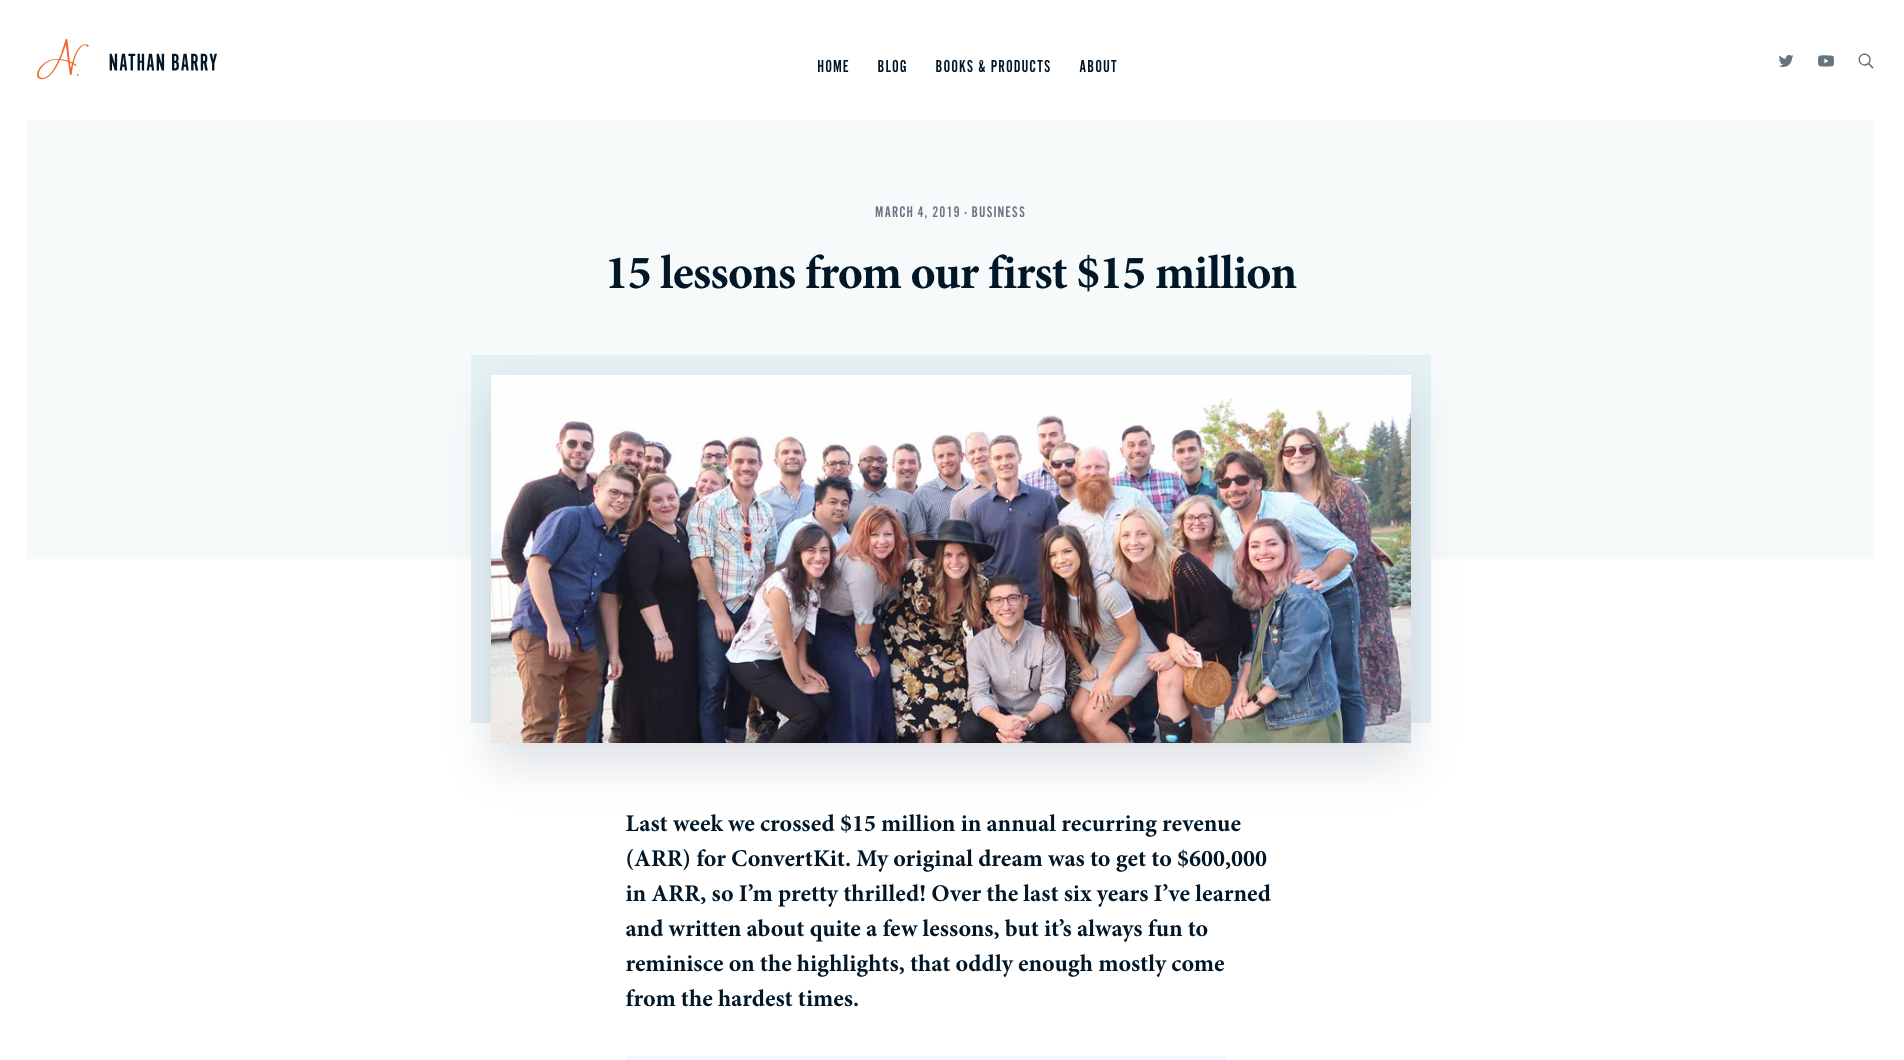 Nathan Barry at ConvertKit (and NathanBarry.com) - "15 lessons from our first $15 million" article